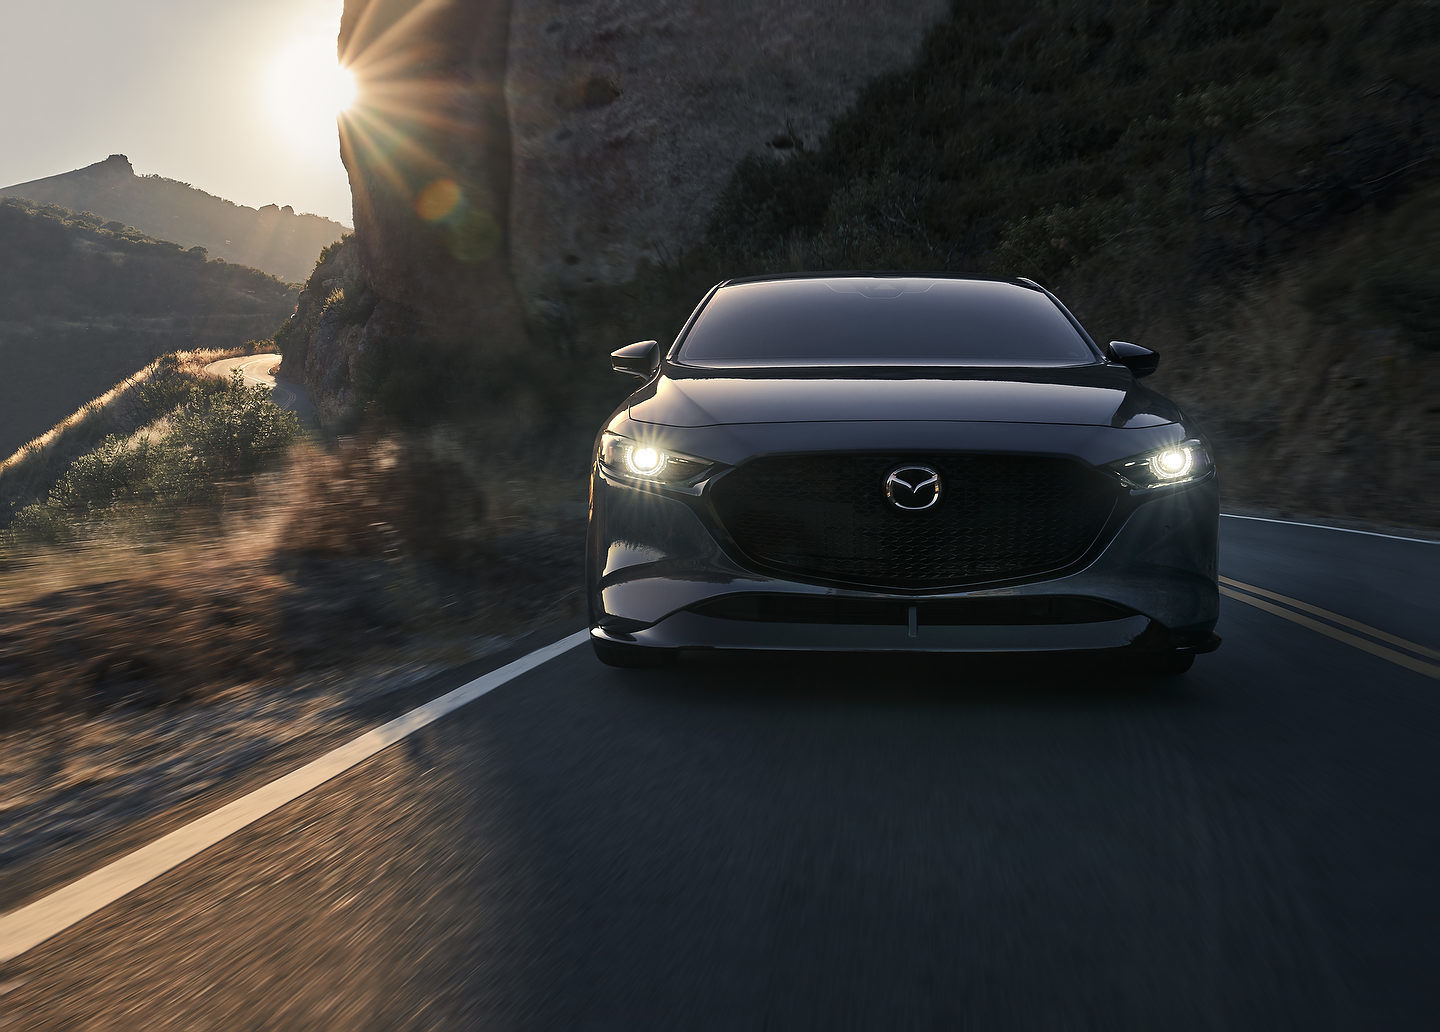 2021 Mazda3 : A different kind of compact vehicle